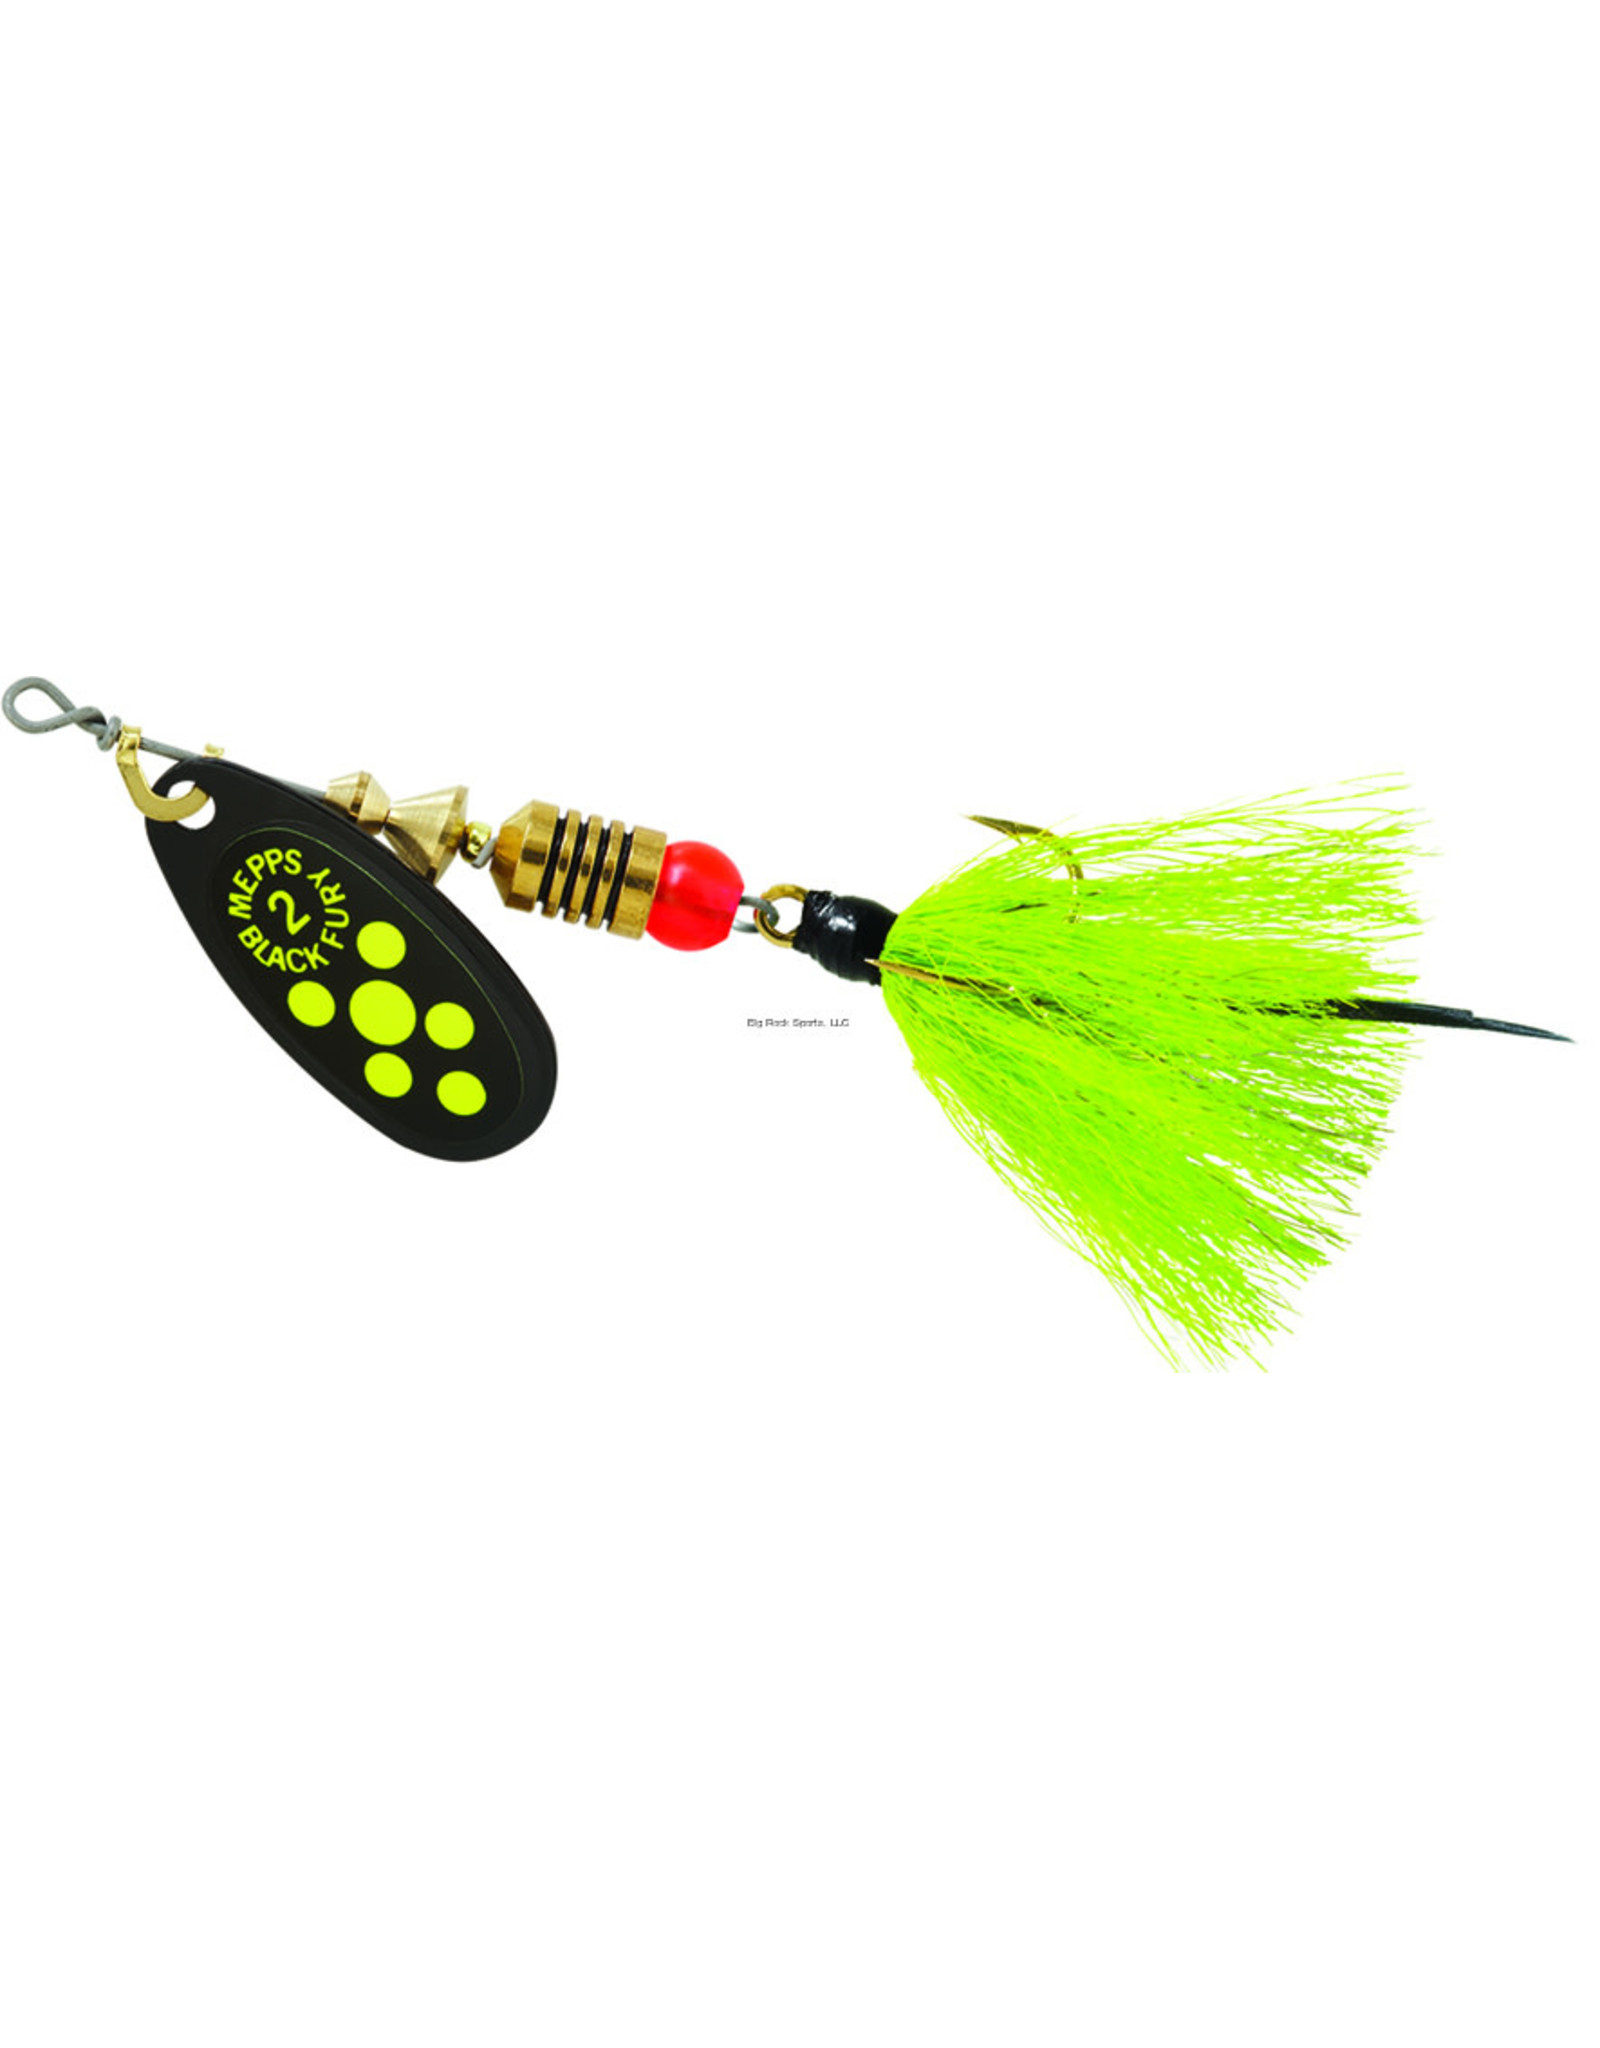 Mepps Mepps BF2T CH Black Fury In-Line Spinner, 1/6 oz, Dressed Treble Hook, Chartreuse Dot Blade with Gray & Chartreuse Tail